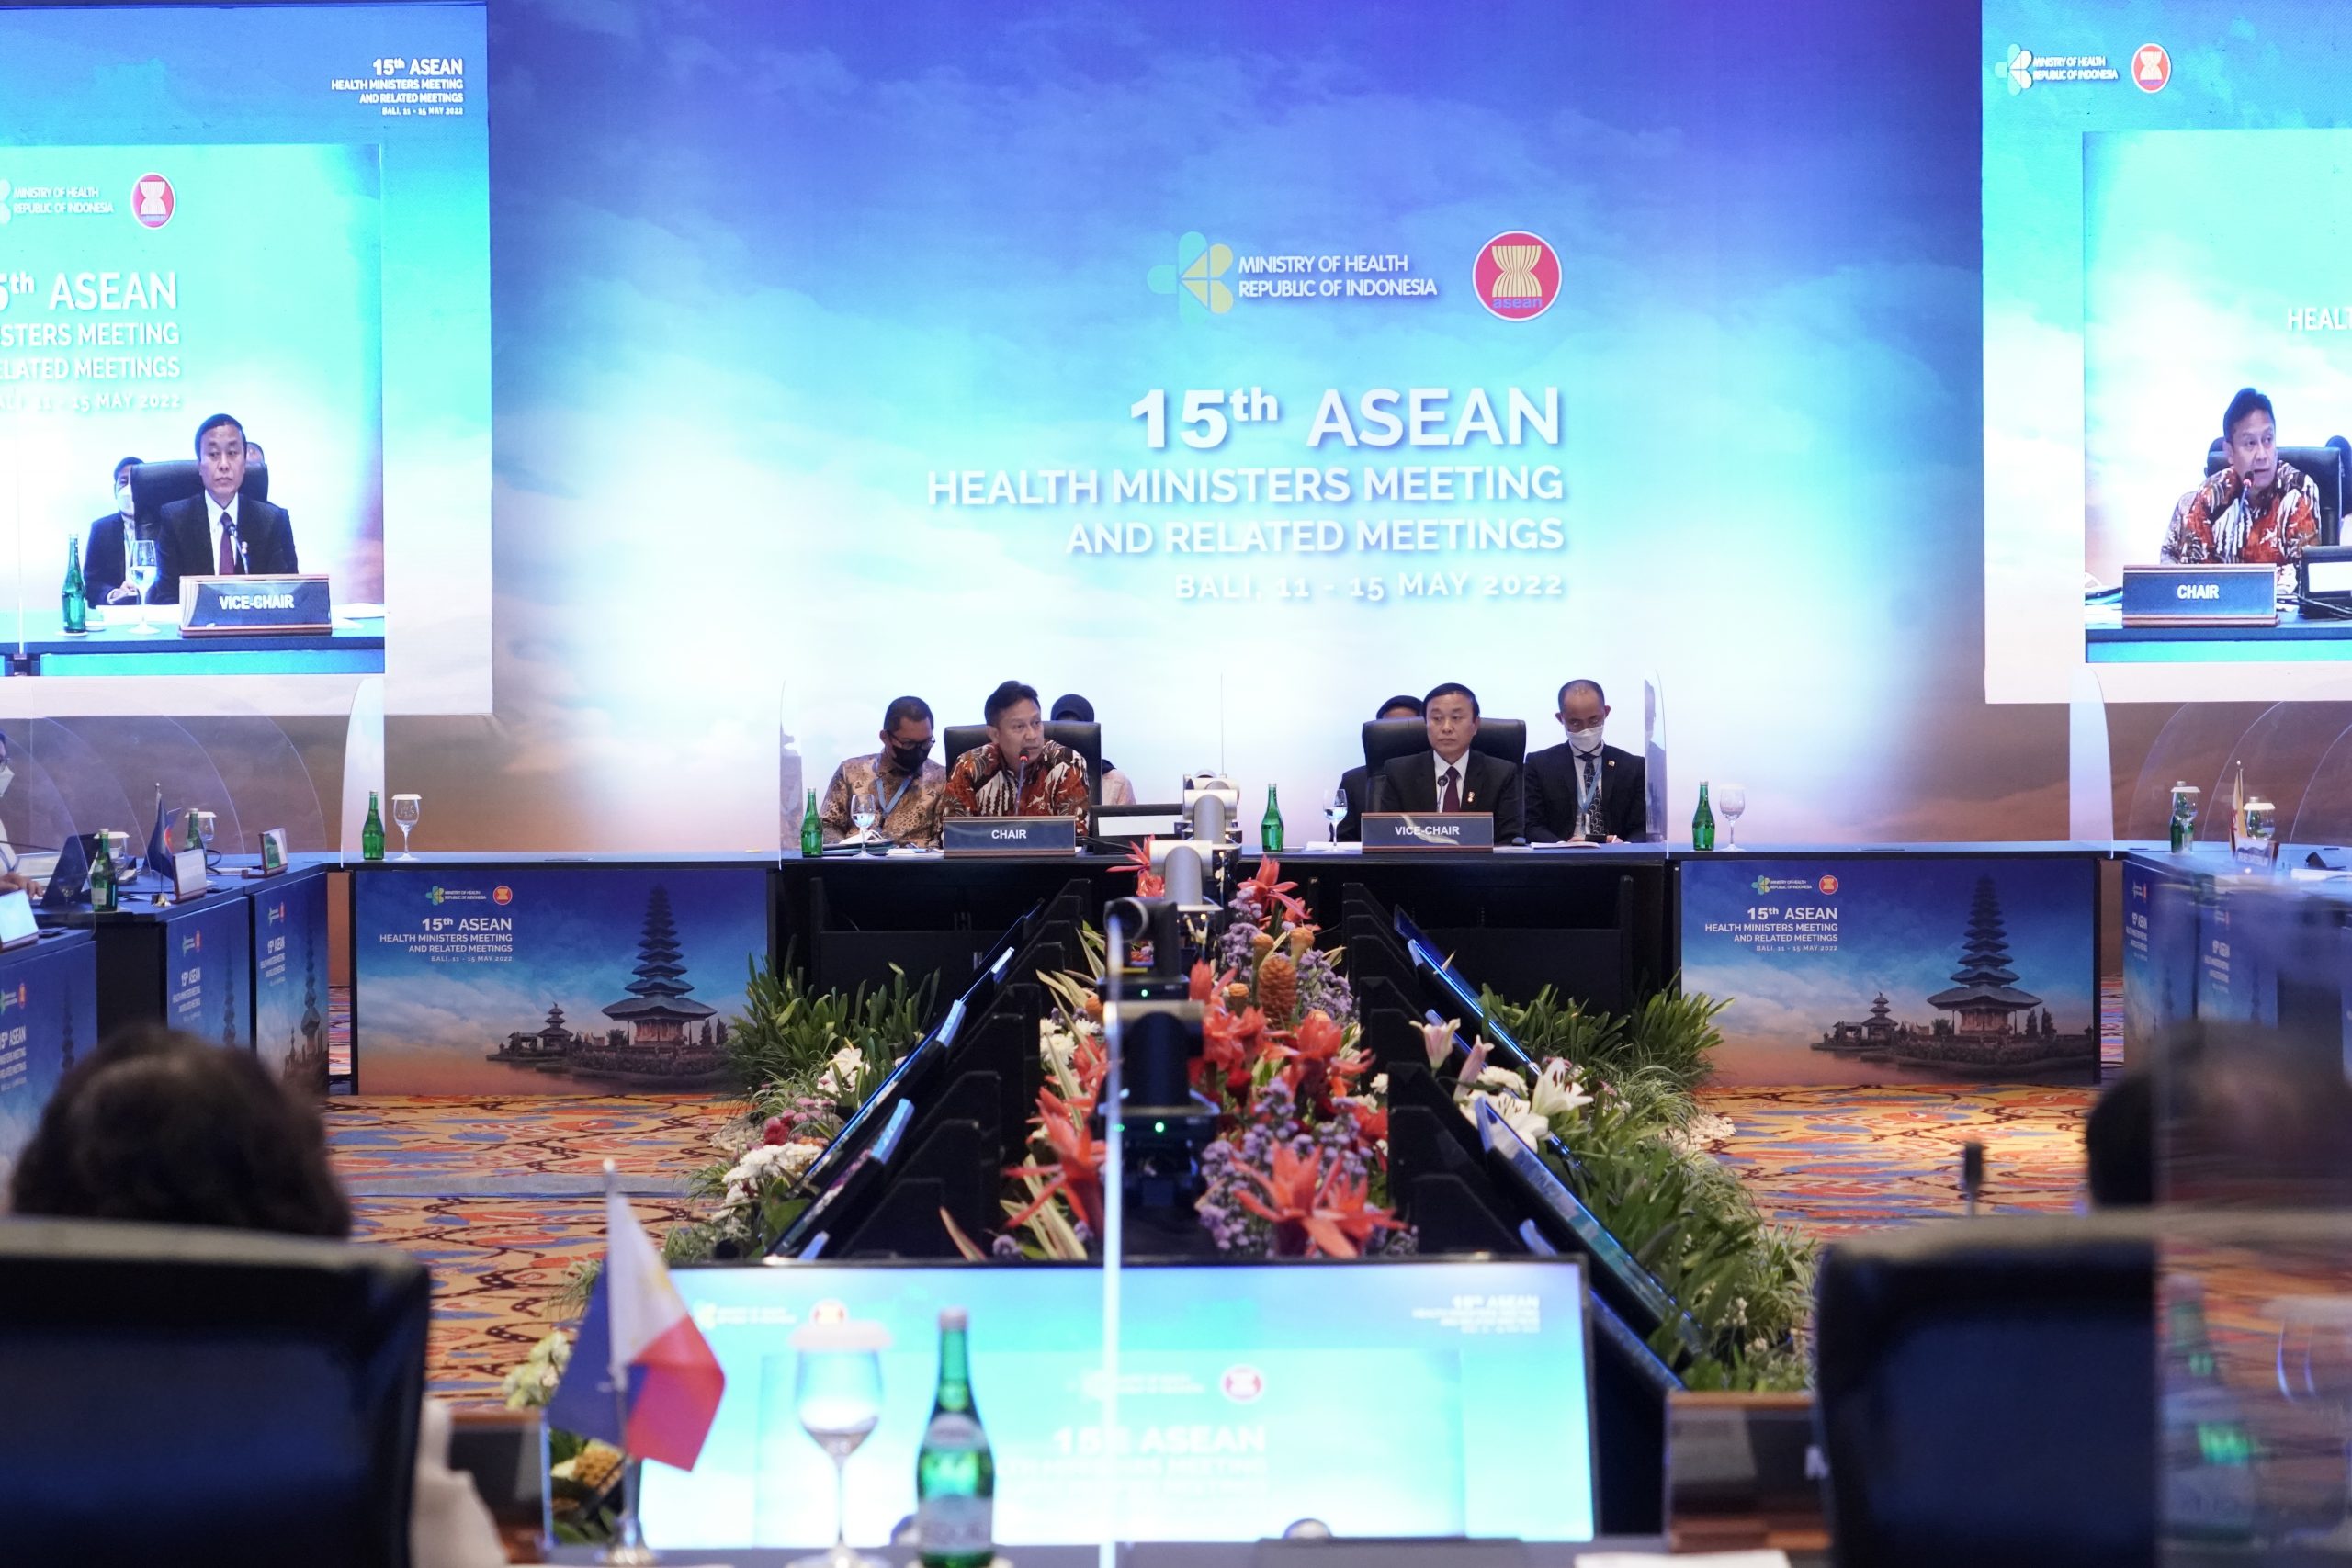 Joint Statement of the 15th ASEAN Health Ministers Meeting ASEAN Main